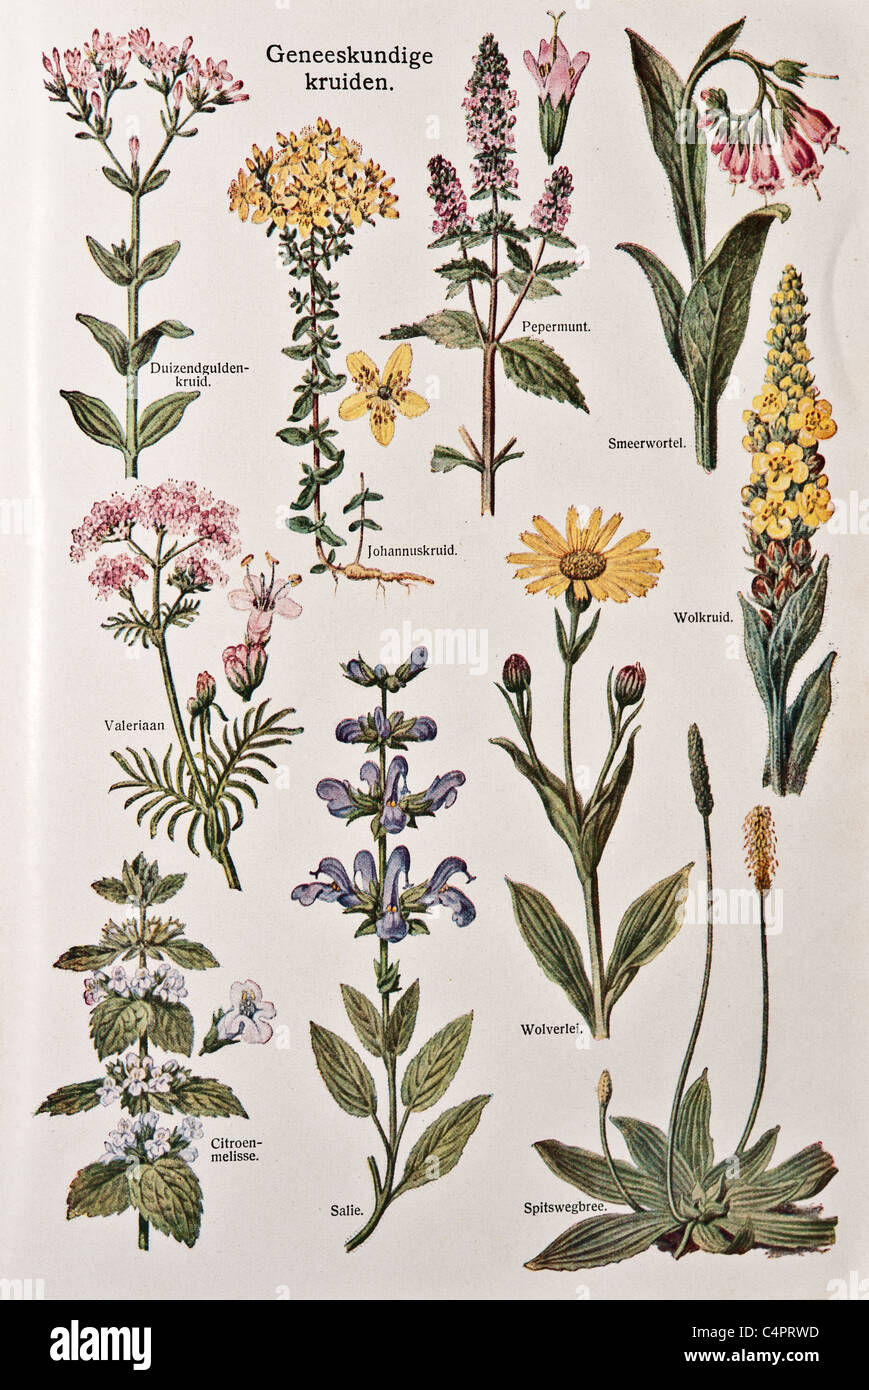 Antique illustrations of plants used as medicine or for medicinal purposes. Stock Photo